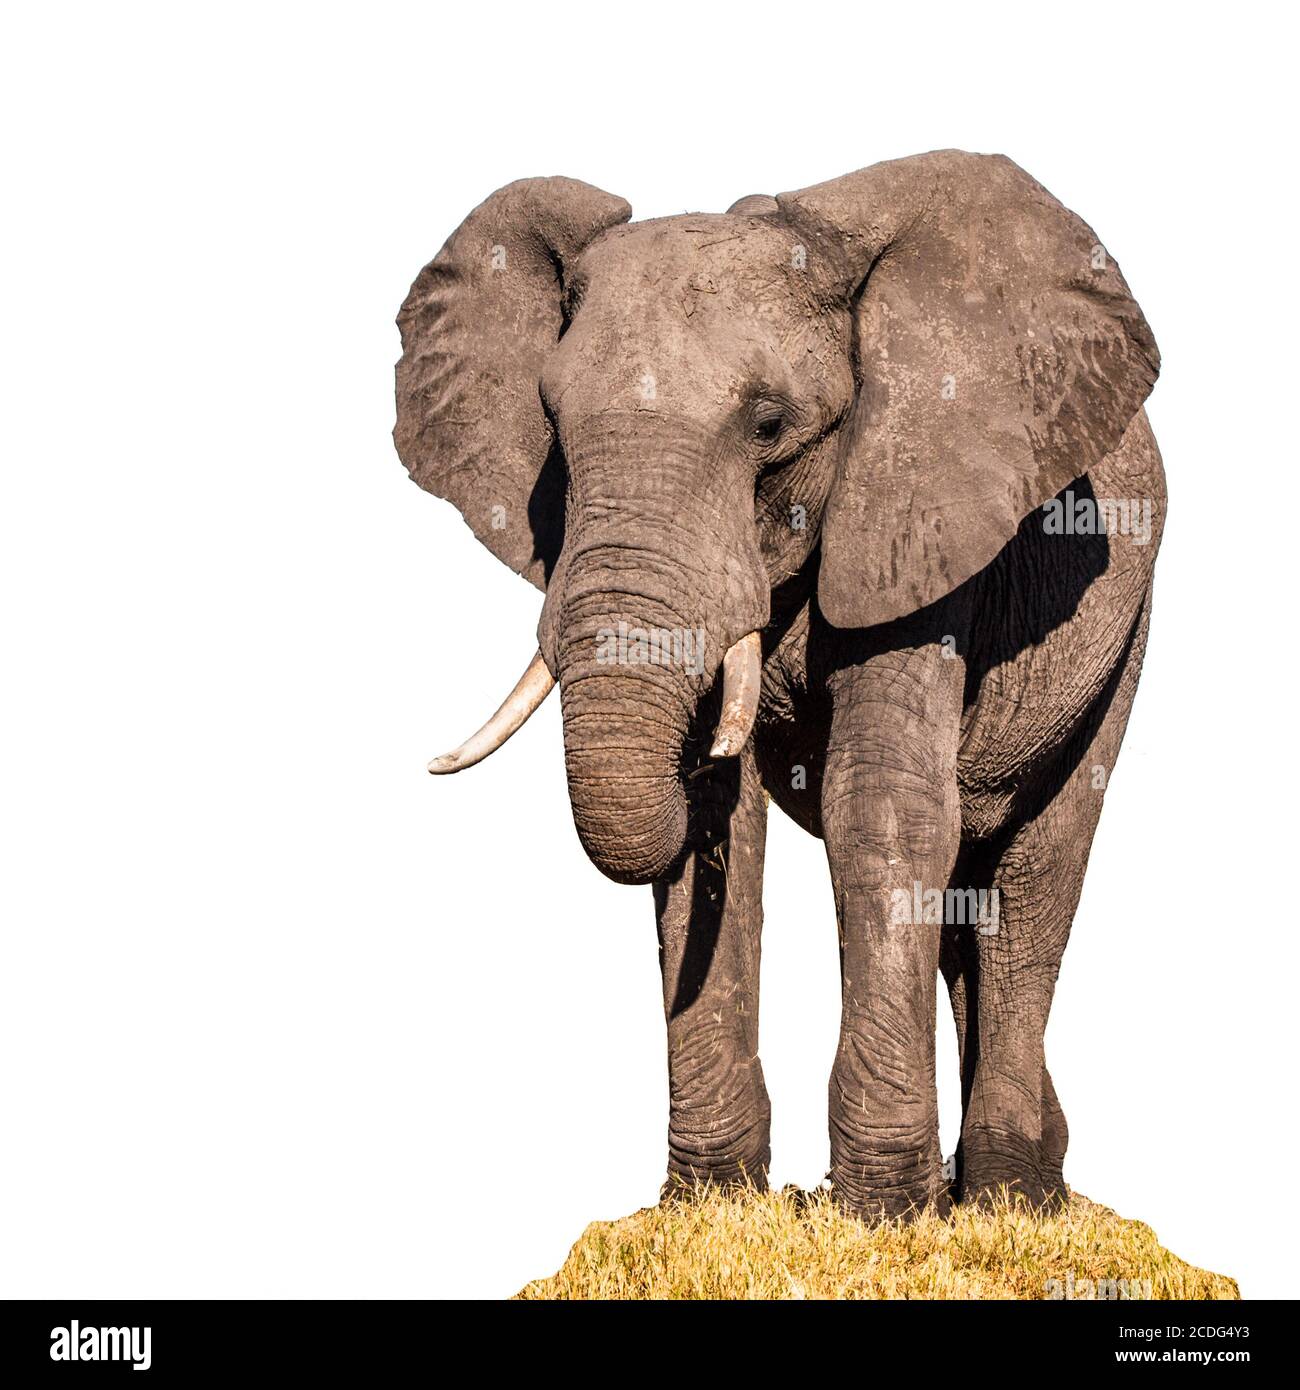 Huge african elephant standing on in the grass and eating. Isolated on white background. Stock Photo